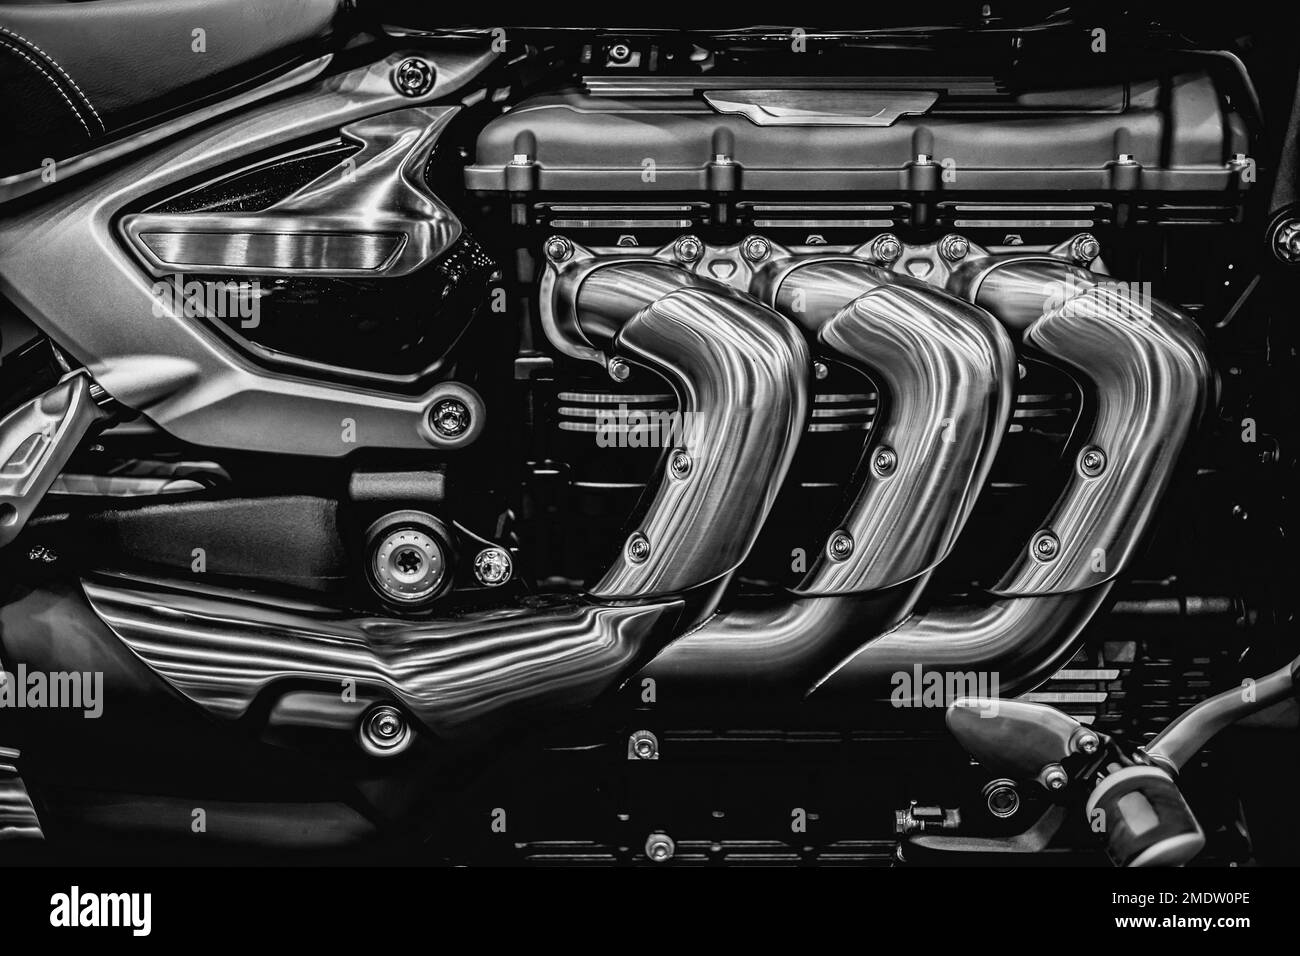 Motorcycle engine. Closeup superbike engine exhaust pipes art photography in black and white vintage Stock Photo